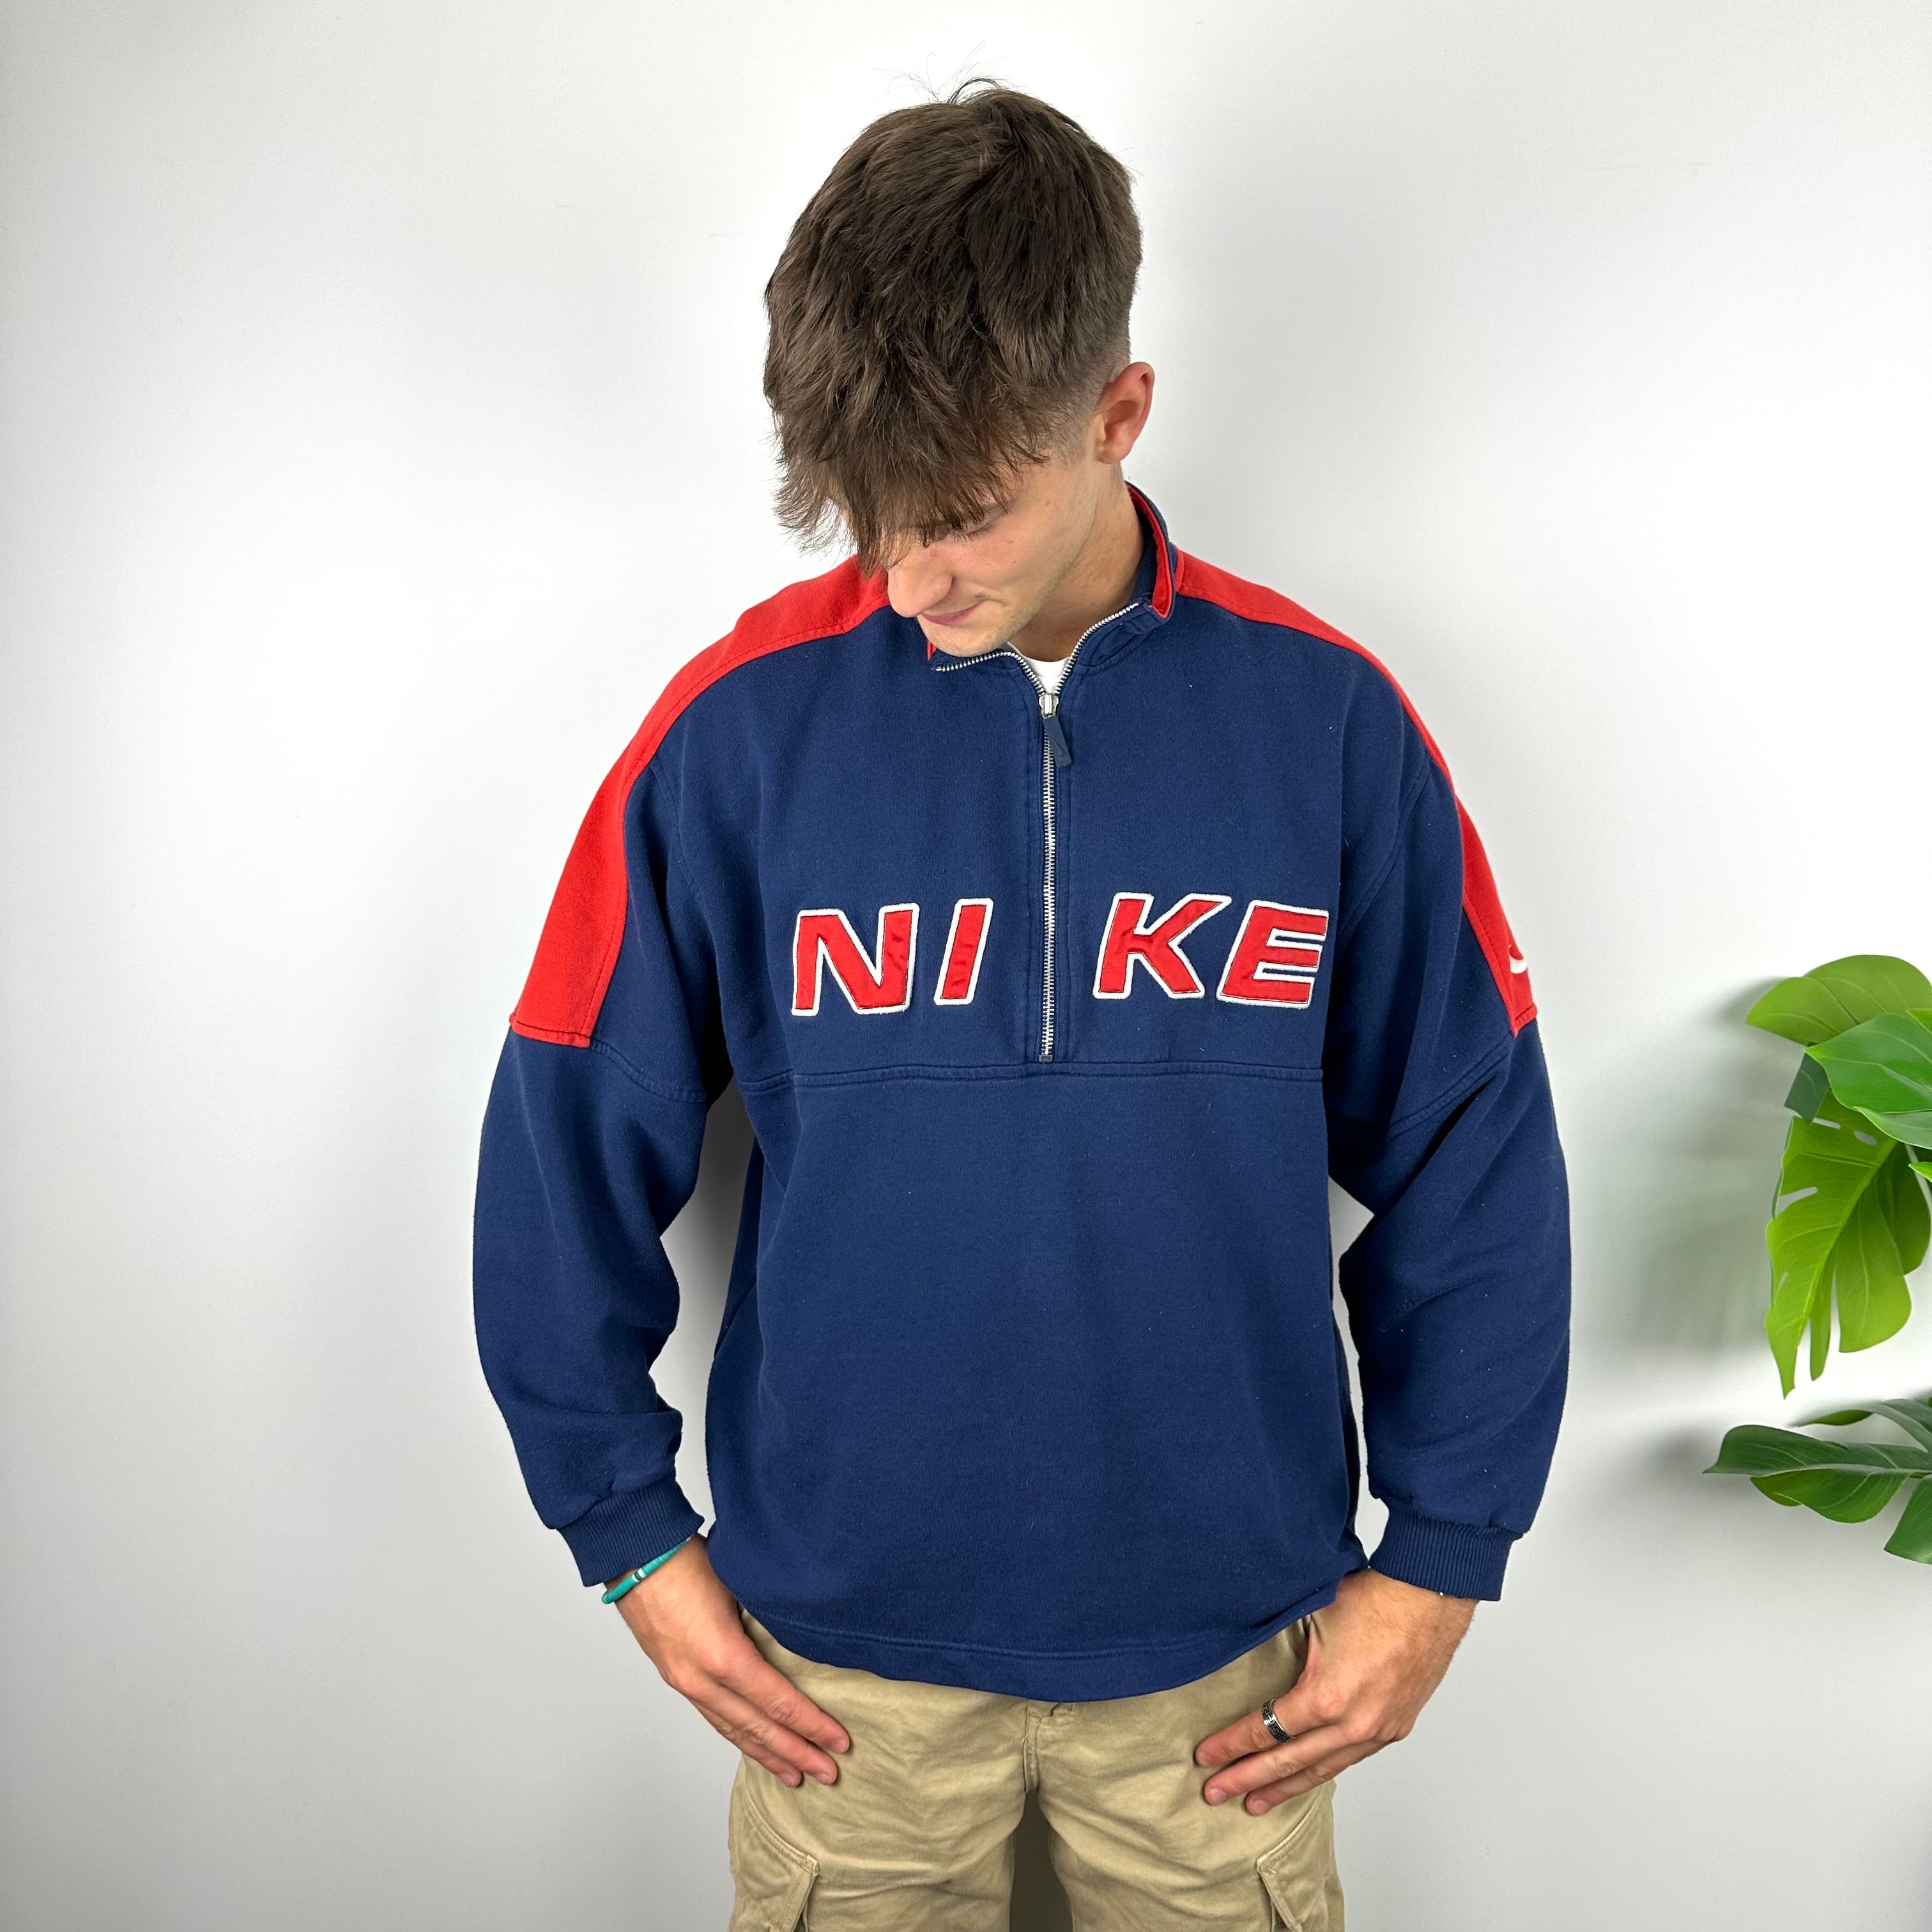 Nike Navy Embroidered Spell Out Quarter Zip Sweatshirt (XL)